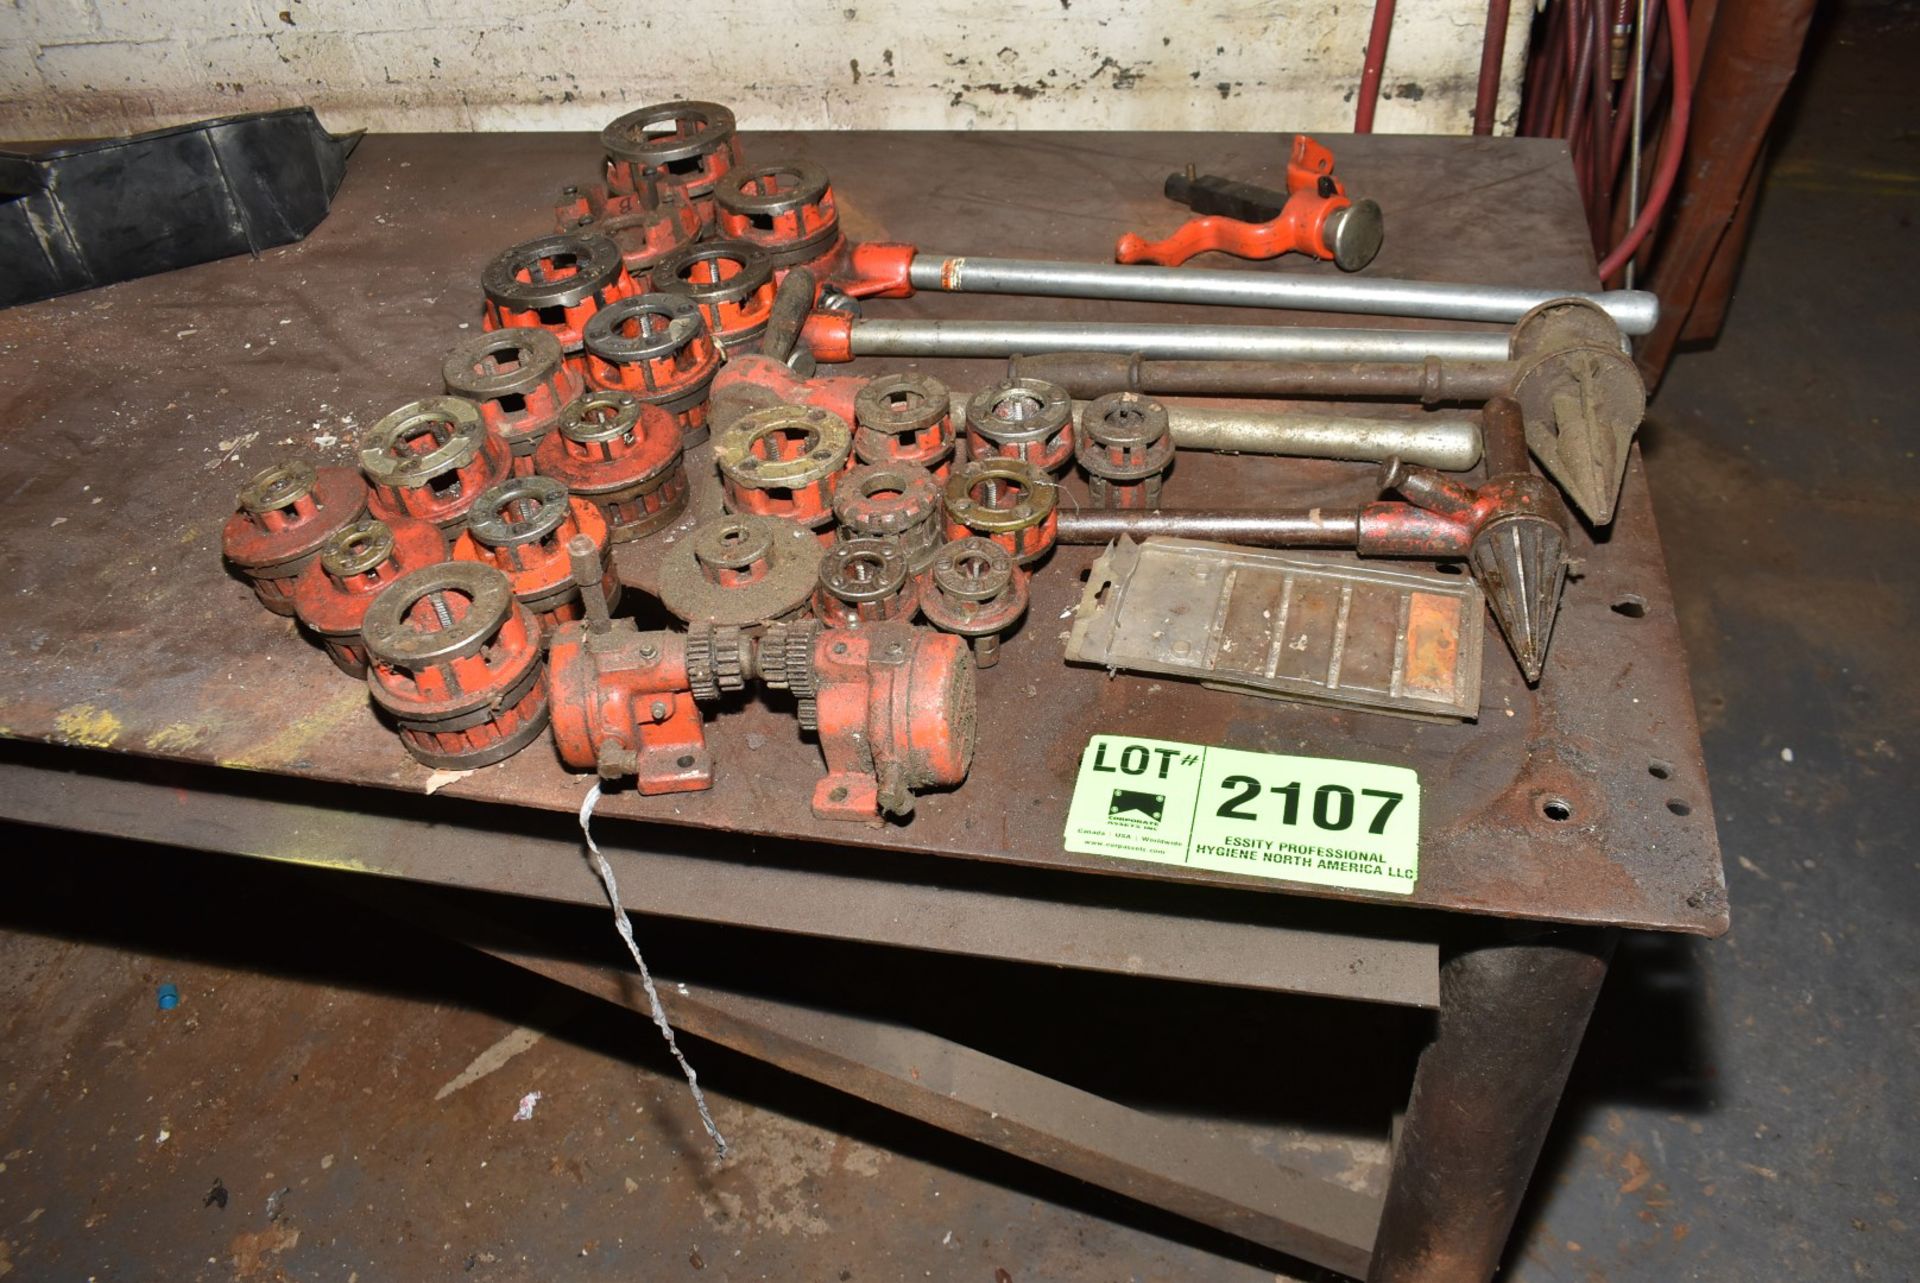 LOT/ RIDGID MANUAL PIPE TREAD TOOLING [RIGGING FEES FOR LOT #2107 - $100 USD PLUS APPLICABLE TAXES]